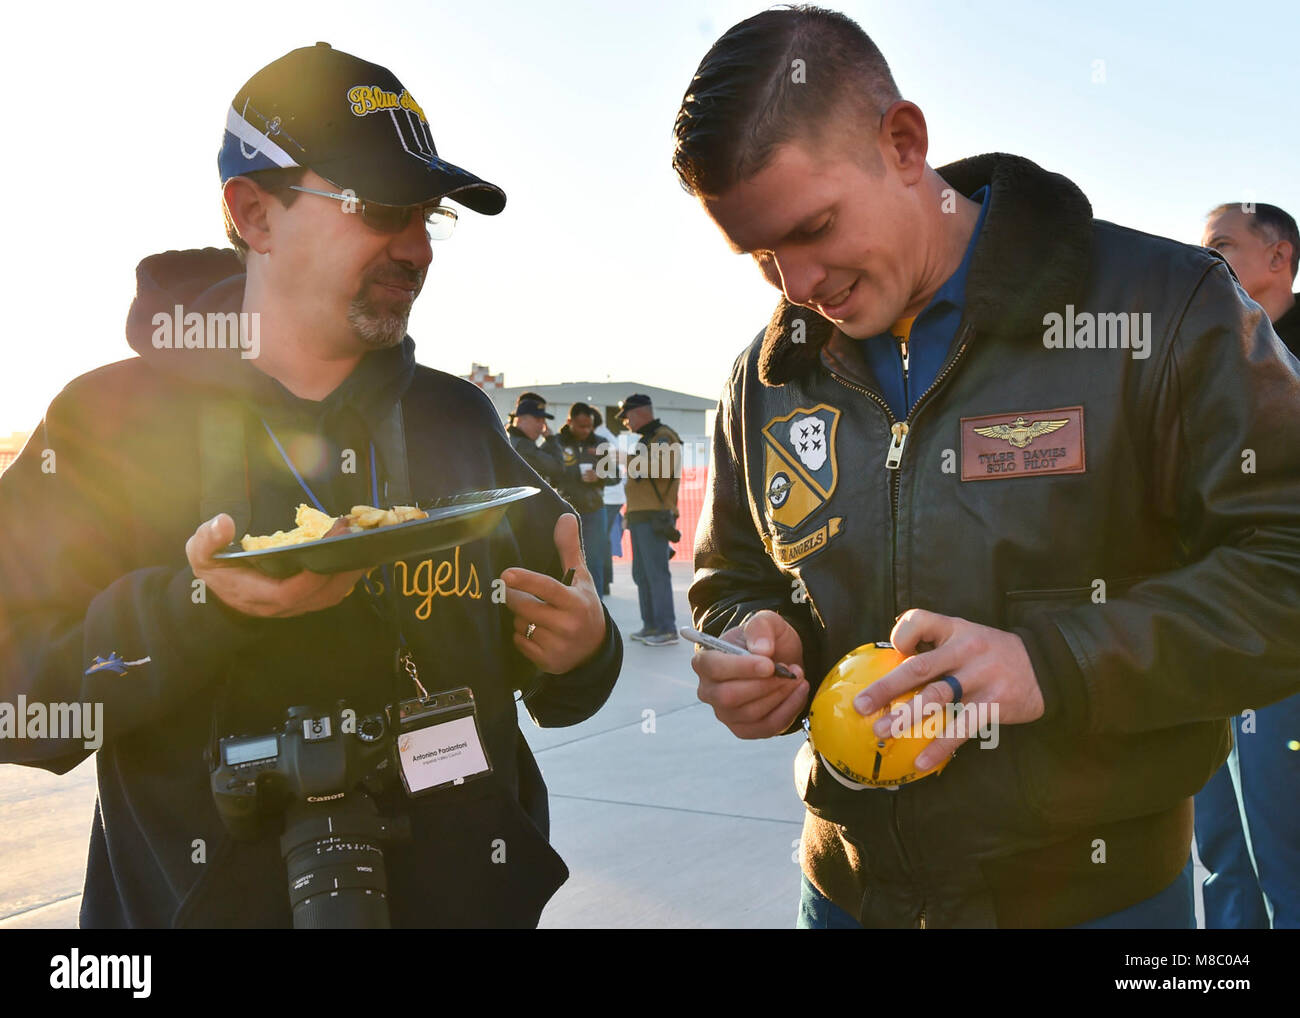 EL CENTRO, Calif. (Feb. 24, 2018) Blue Angels Lead Solo Pilot, Lt. Tyler Davies, signs a fan's miniature helmet during a breakfast event at NAF El Centro. The Blue Angels are scheduled to perform more than 60 demonstrations at more than 30 locations across the U.S. in 2018. (U.S. Navy Stock Photo